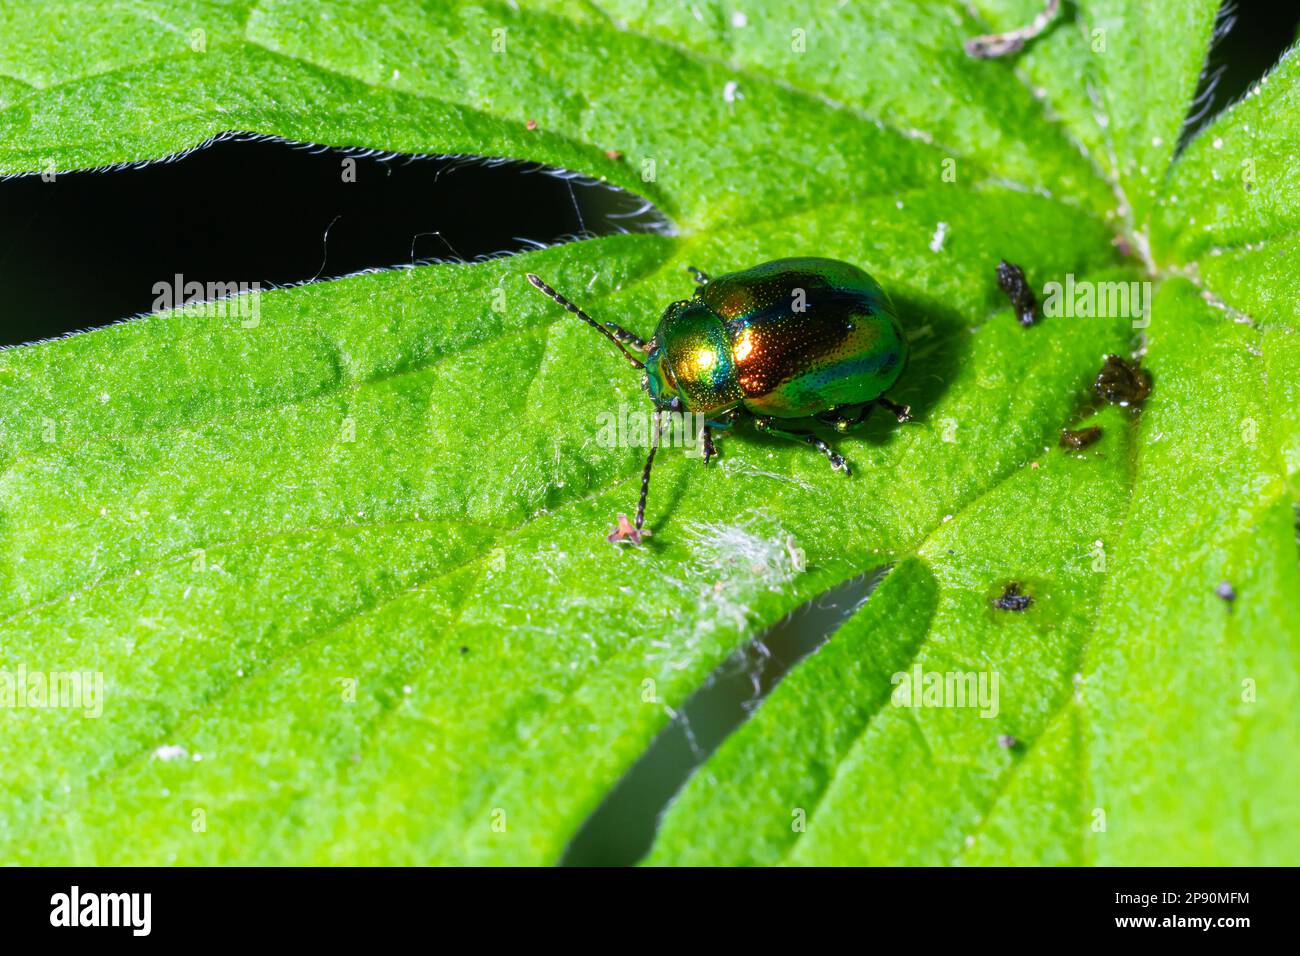 The beetle Chrysolina fastuosa close up pictures on the green leaves. Stock Photo